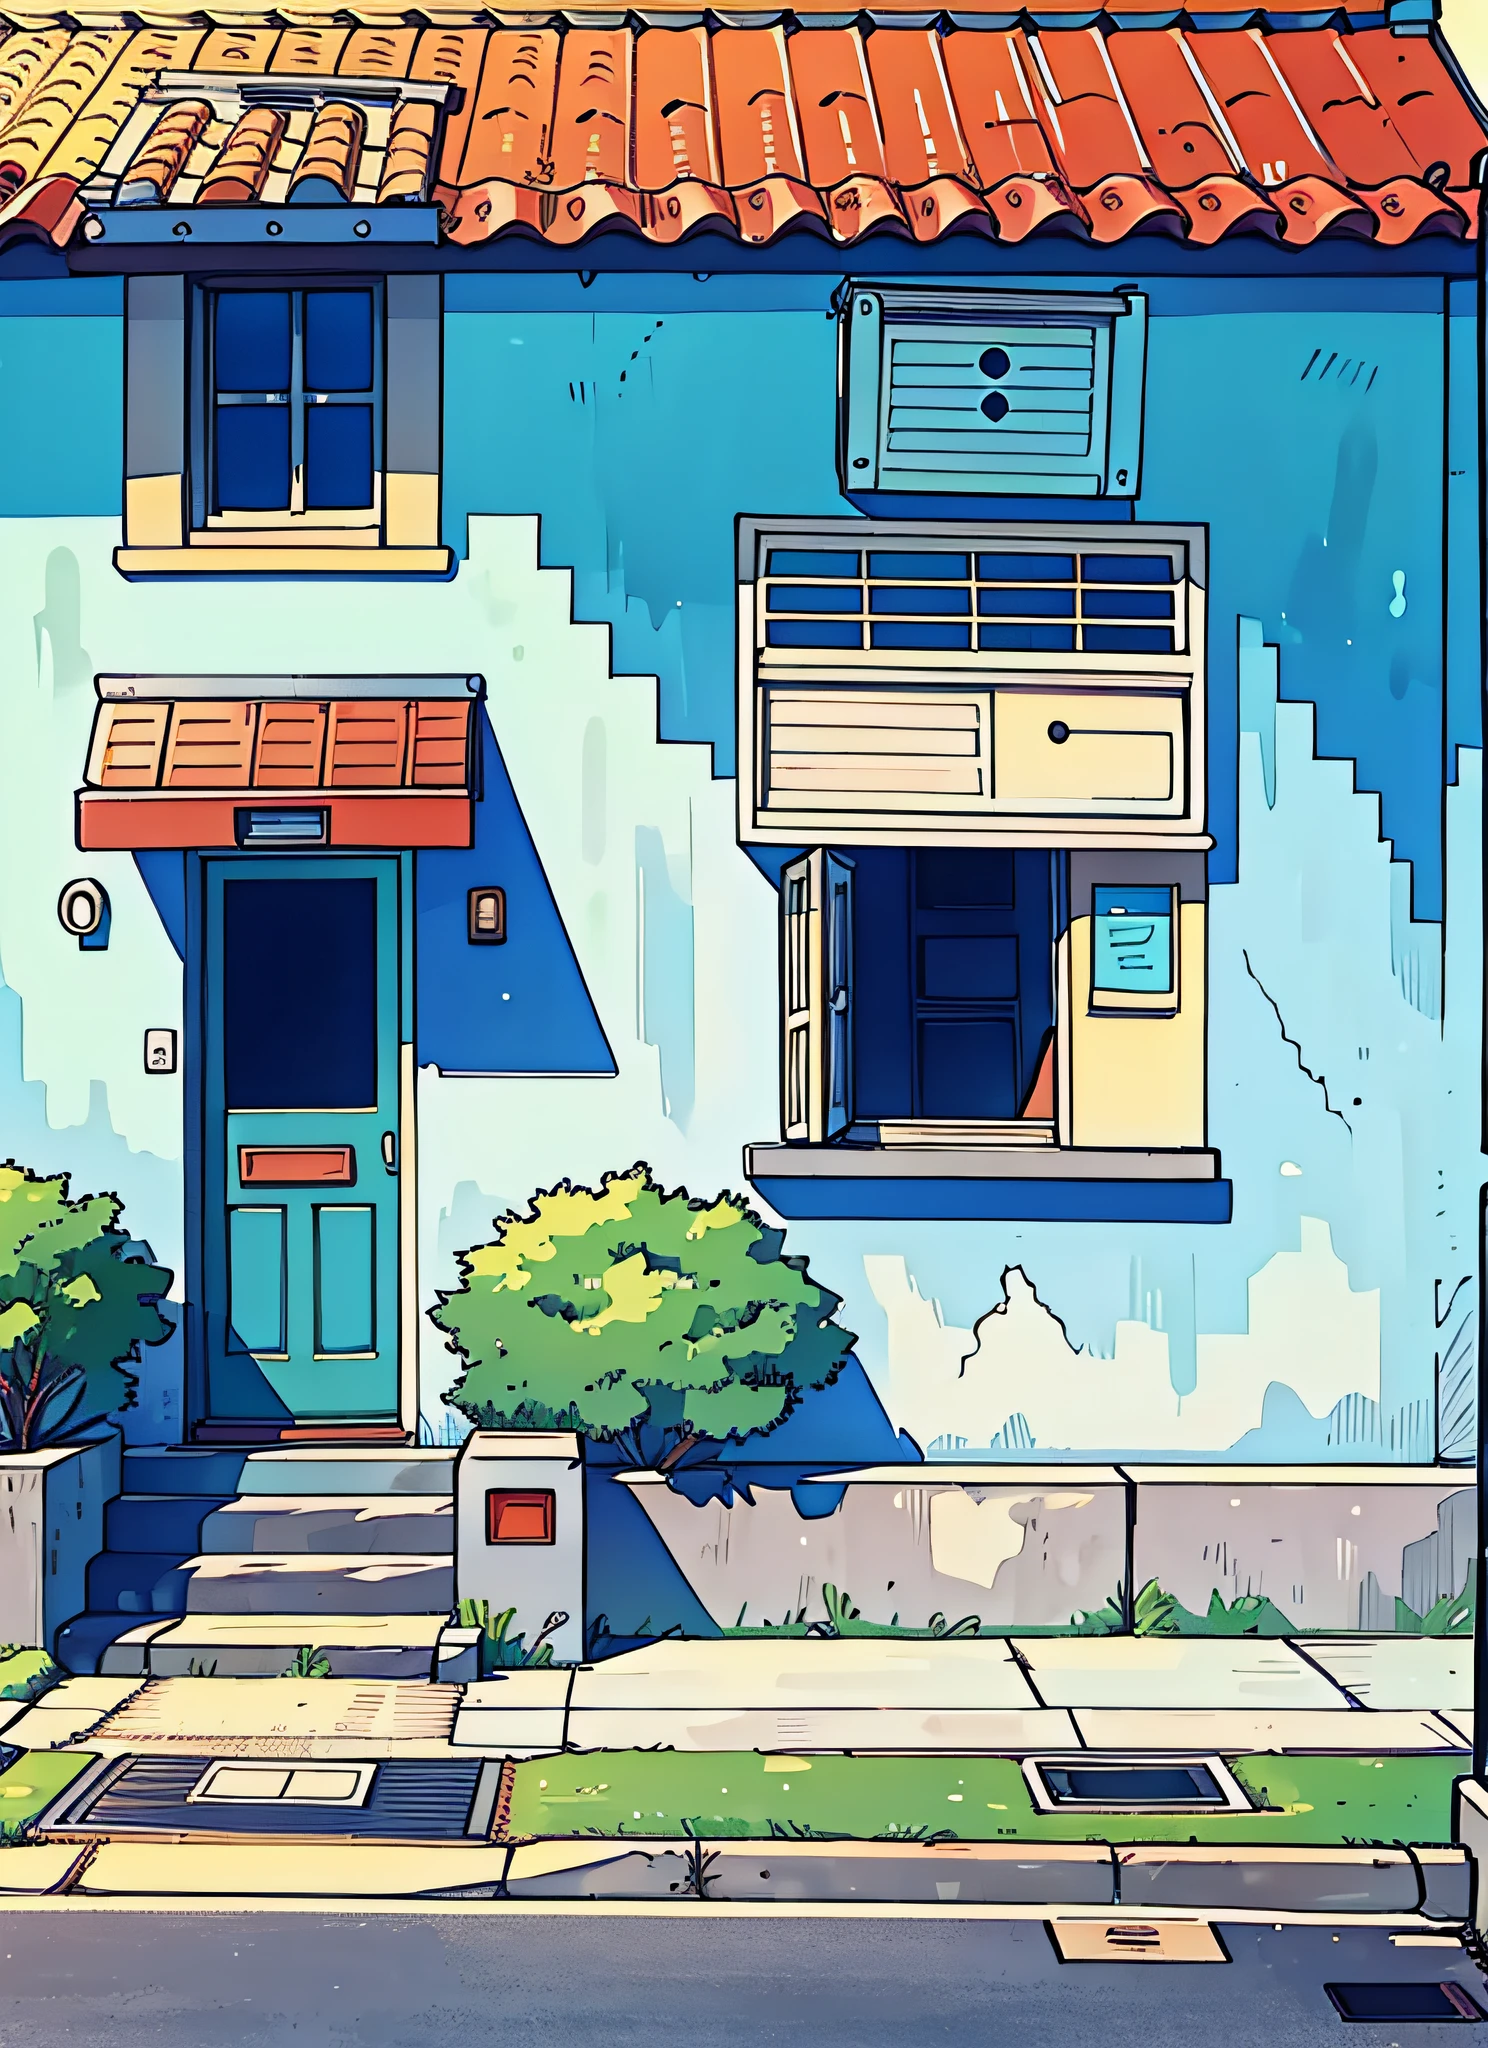 (best-quality:0.8), (best-quality:0.8), (((no humans))), broken introspective perfect anime illustration, front view, a house with a small letter box in front